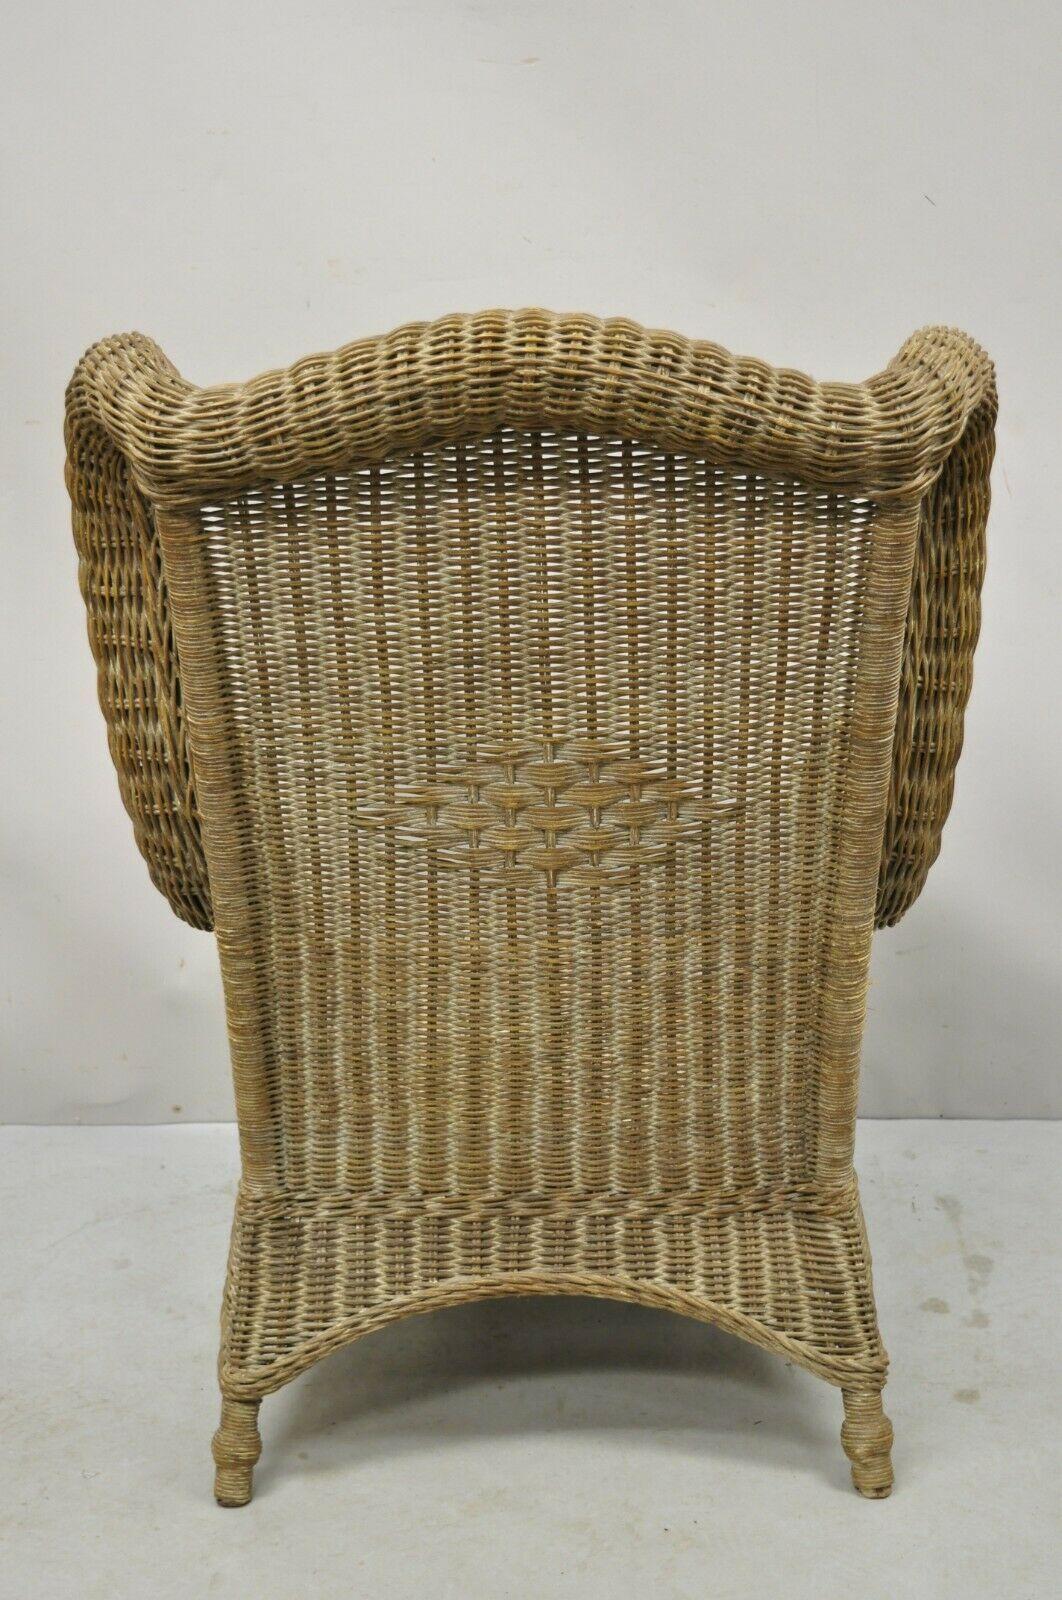 Large Woven Wicker Rattan Victorian Style Wingback Lounge Arm Chair For Sale 3